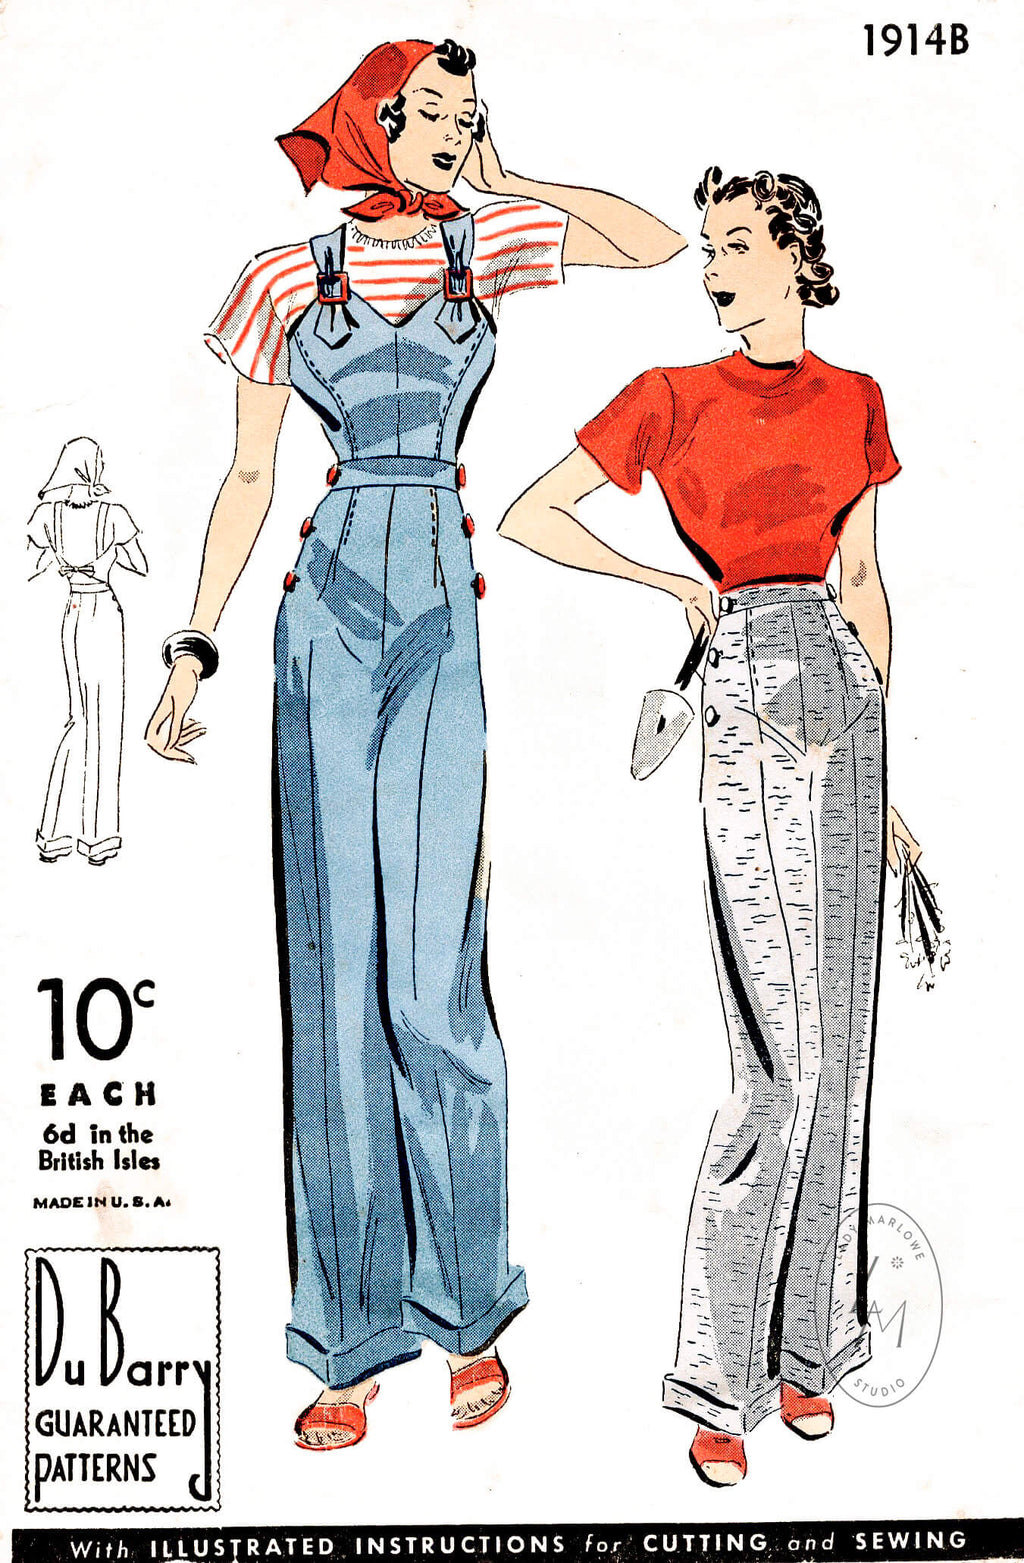 DuBarry 1914B 1930s 1940s rosie the riveter trousers overalls vintage sewing pattern